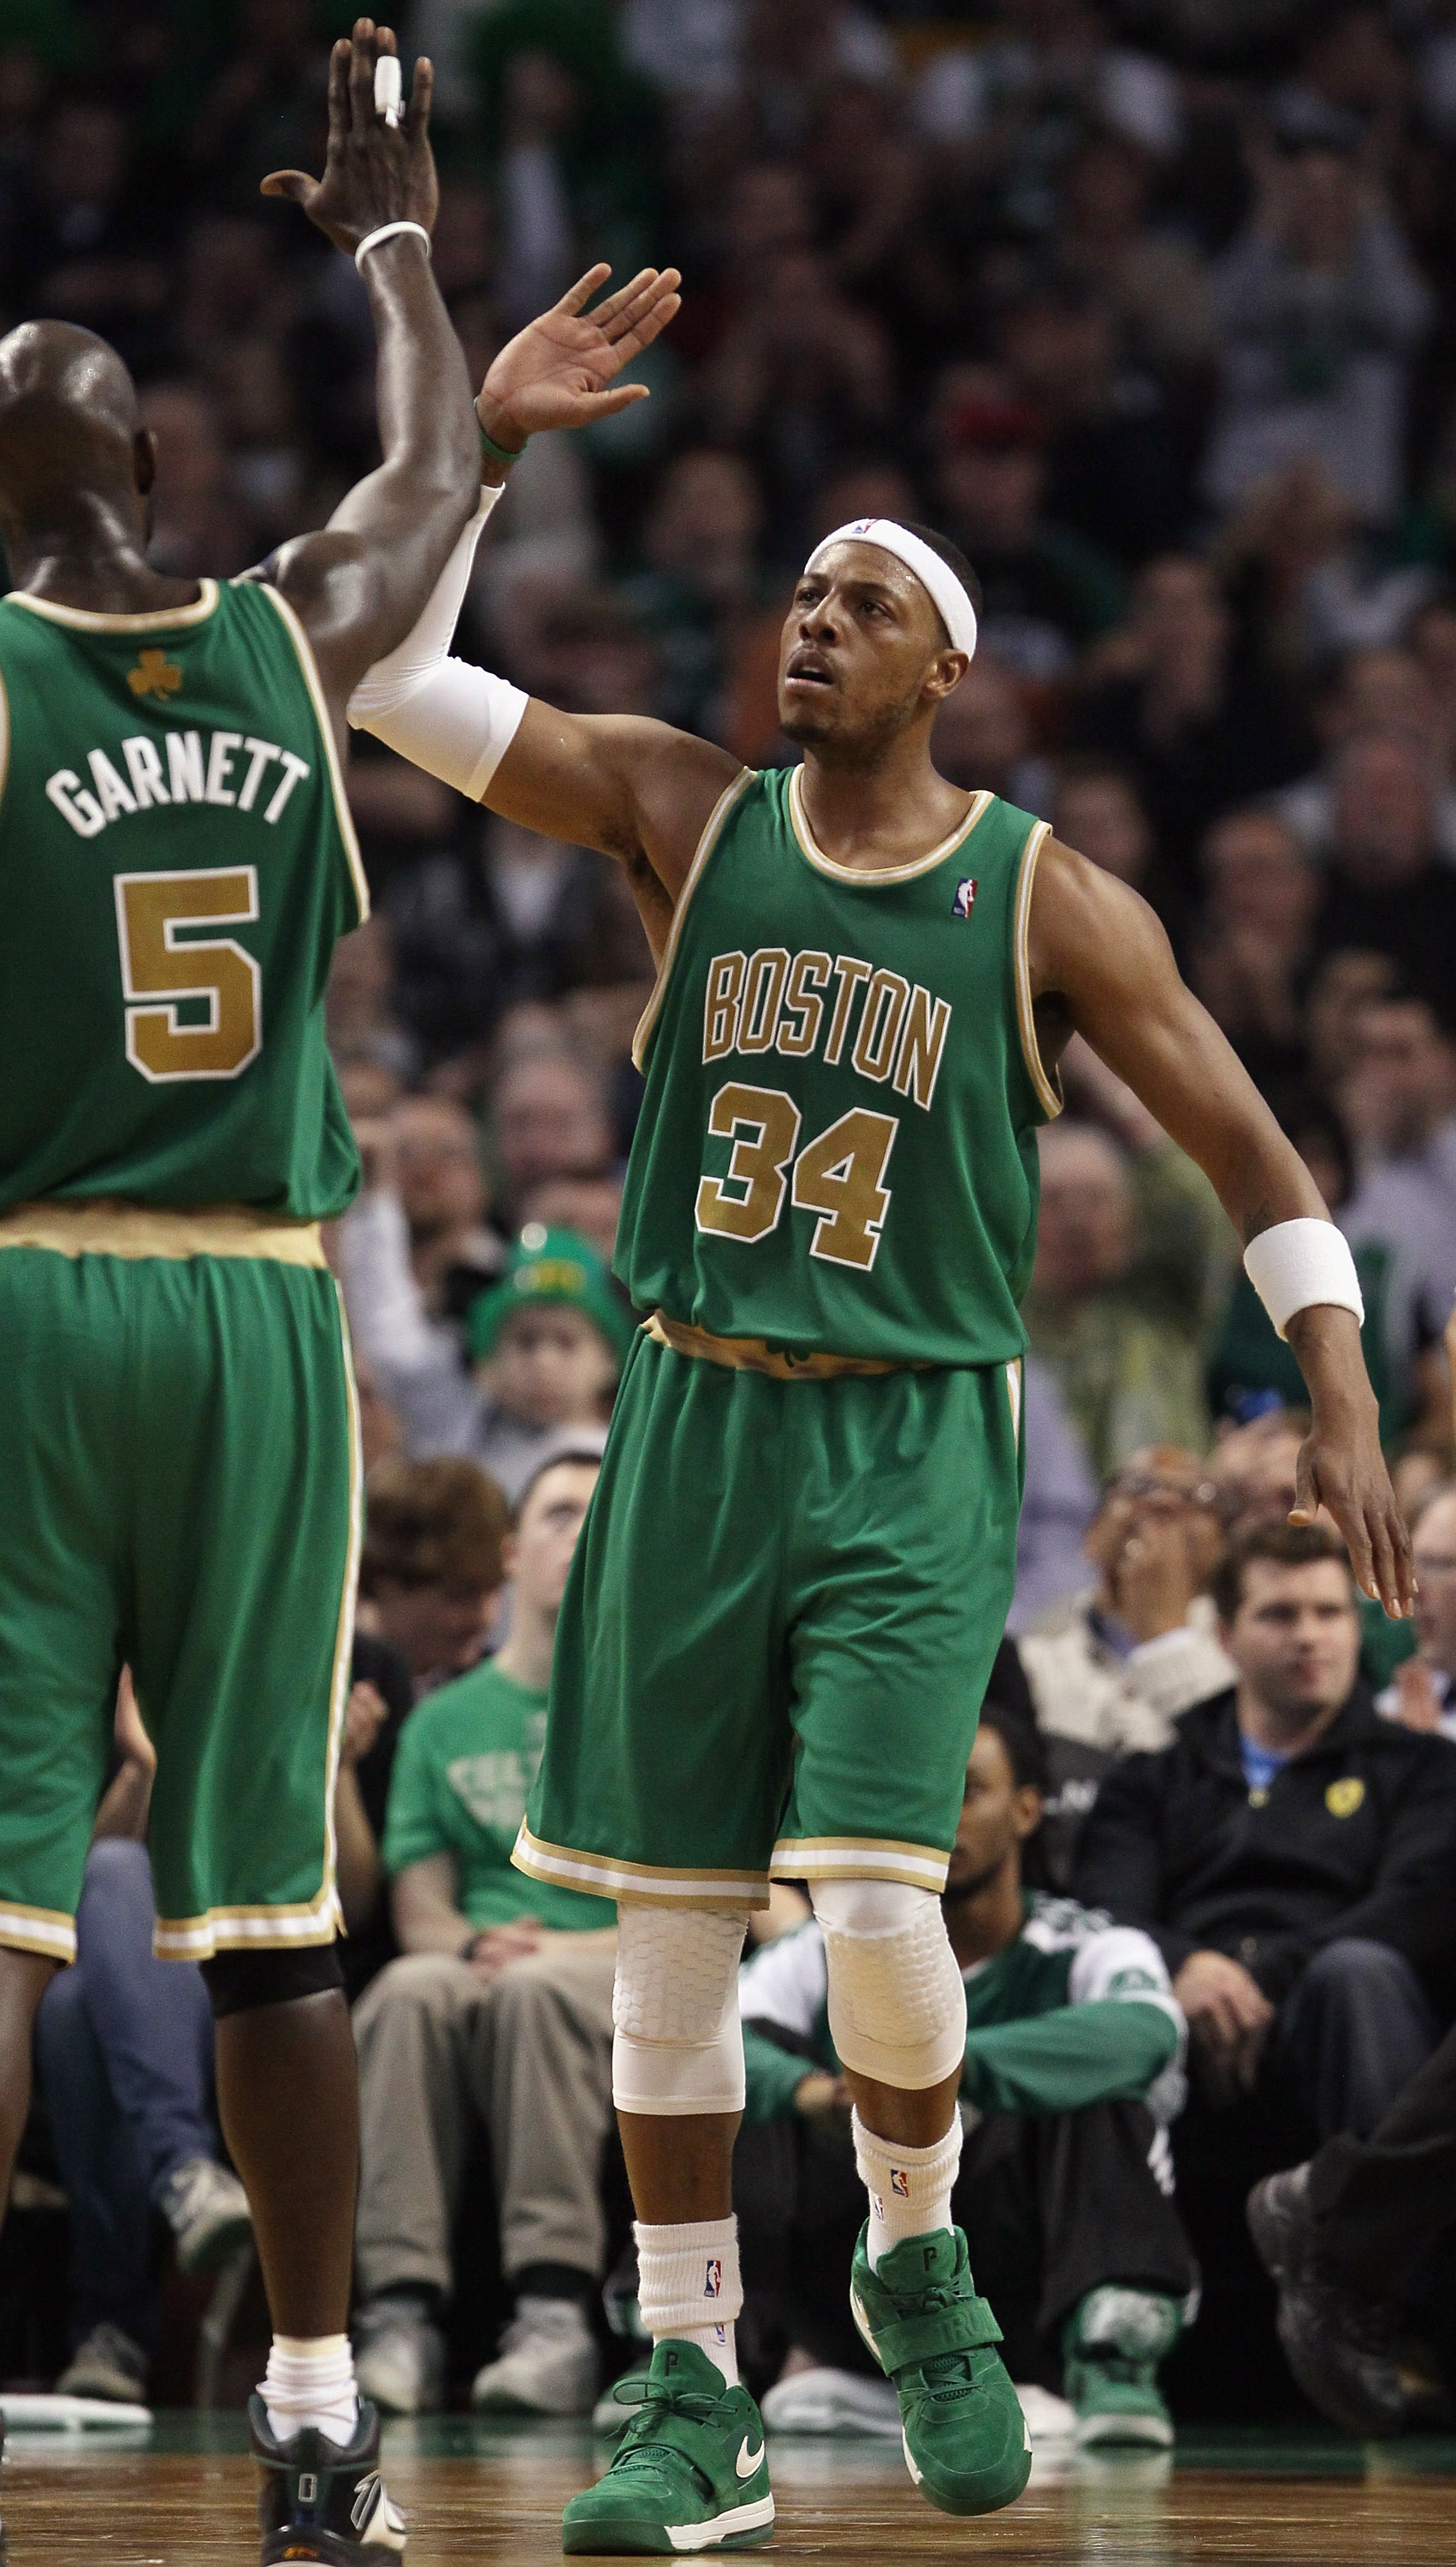 BOSTON, MA - MARCH 16:  Paul Pierce #34 of the Boston Celtics is congratulated by teammate Kevin Garnett #5 after Pierce drew the foul in the second half against the Indiana Pacers on March 16, 2011 at the TD Garden in Boston, Massachusetts. The Celtics d